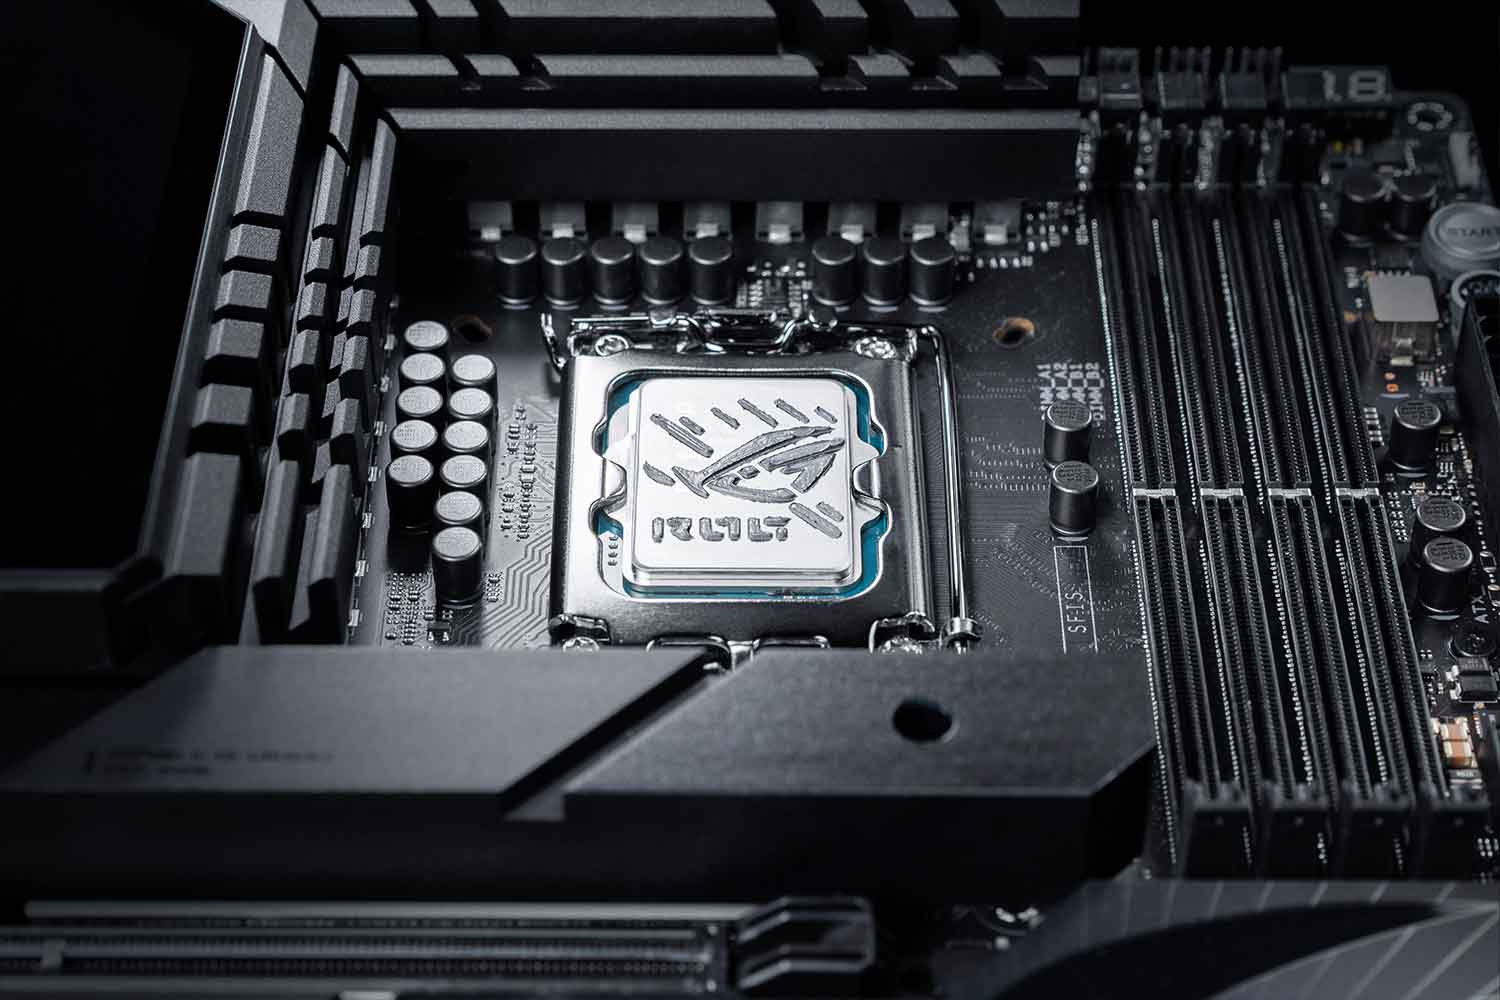 The ROG RG-07 Performance Thermal Paste applied as the ROG logo on the CPU.